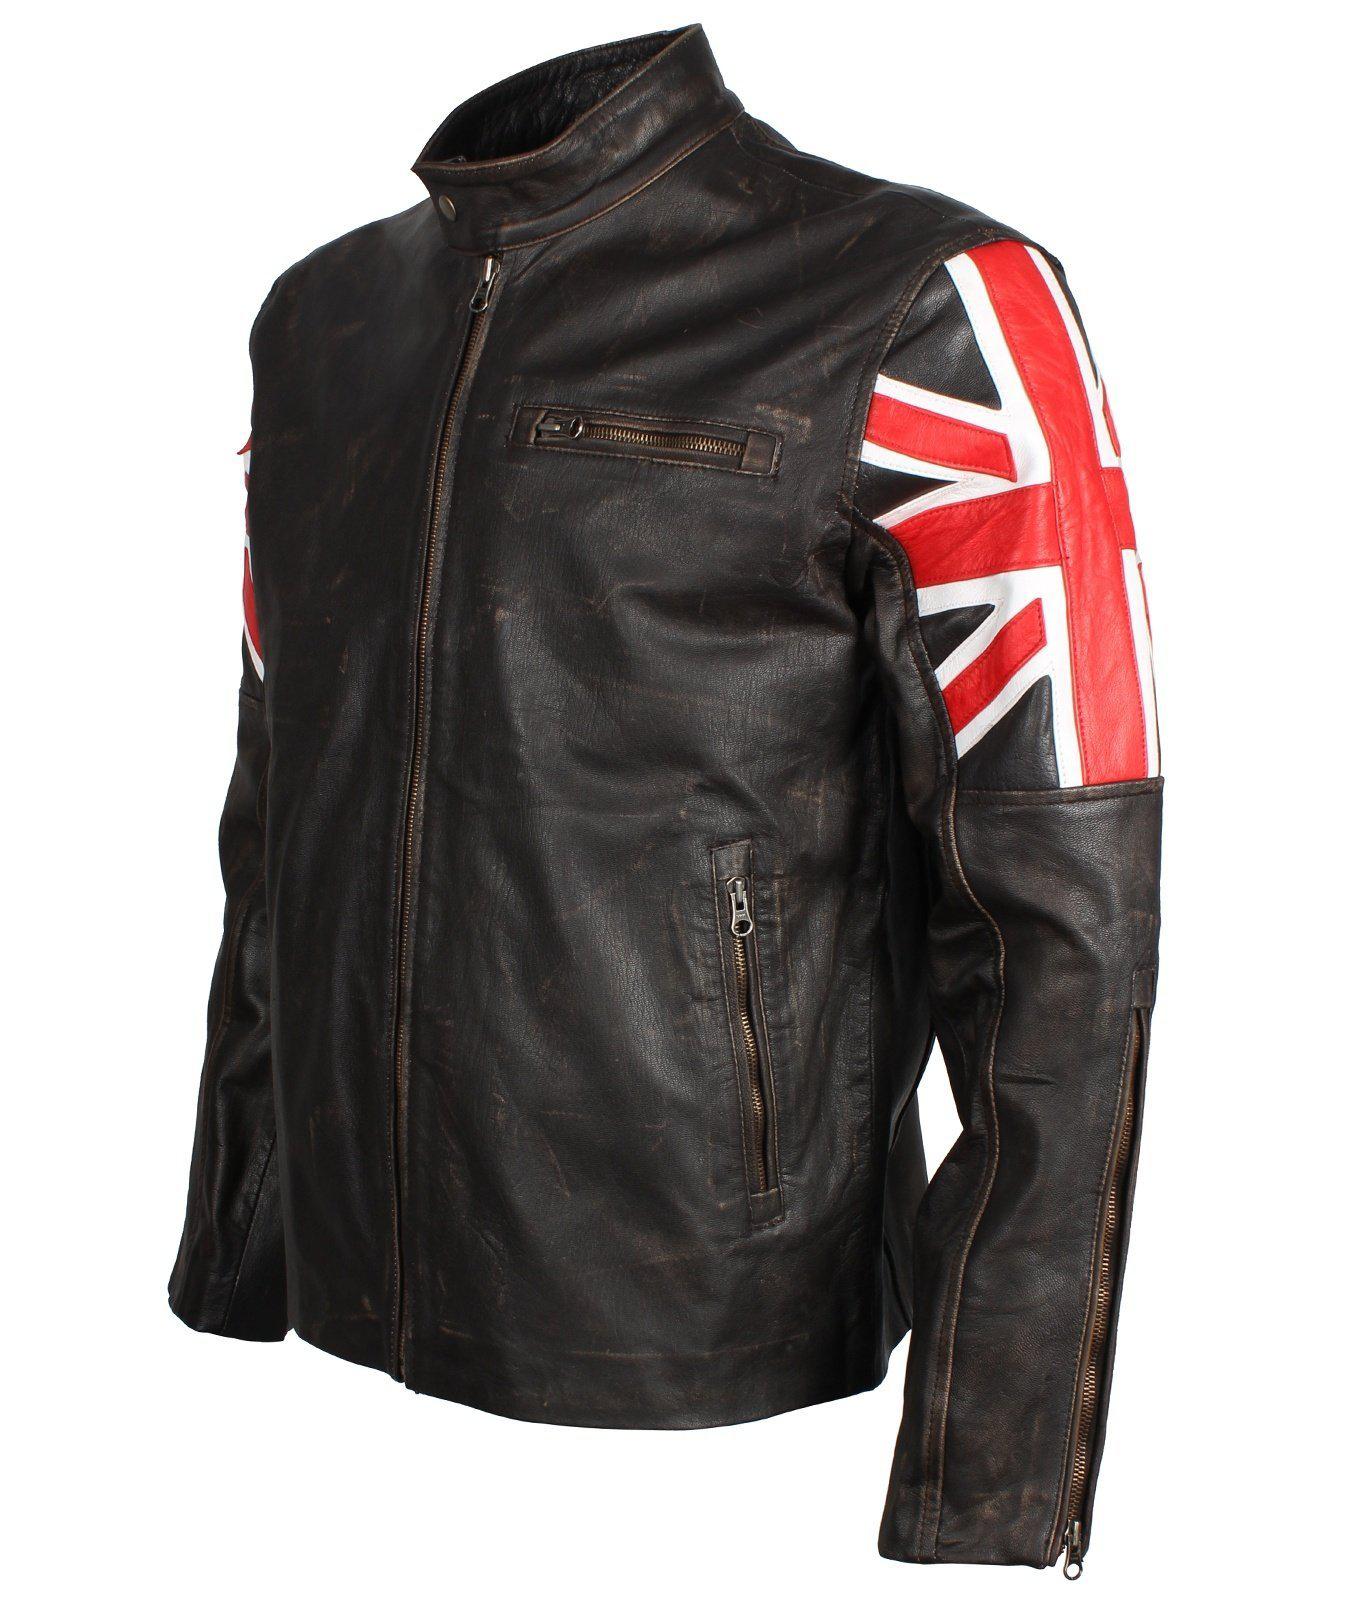 Men's Union Jack Jacket in Distressed Leather